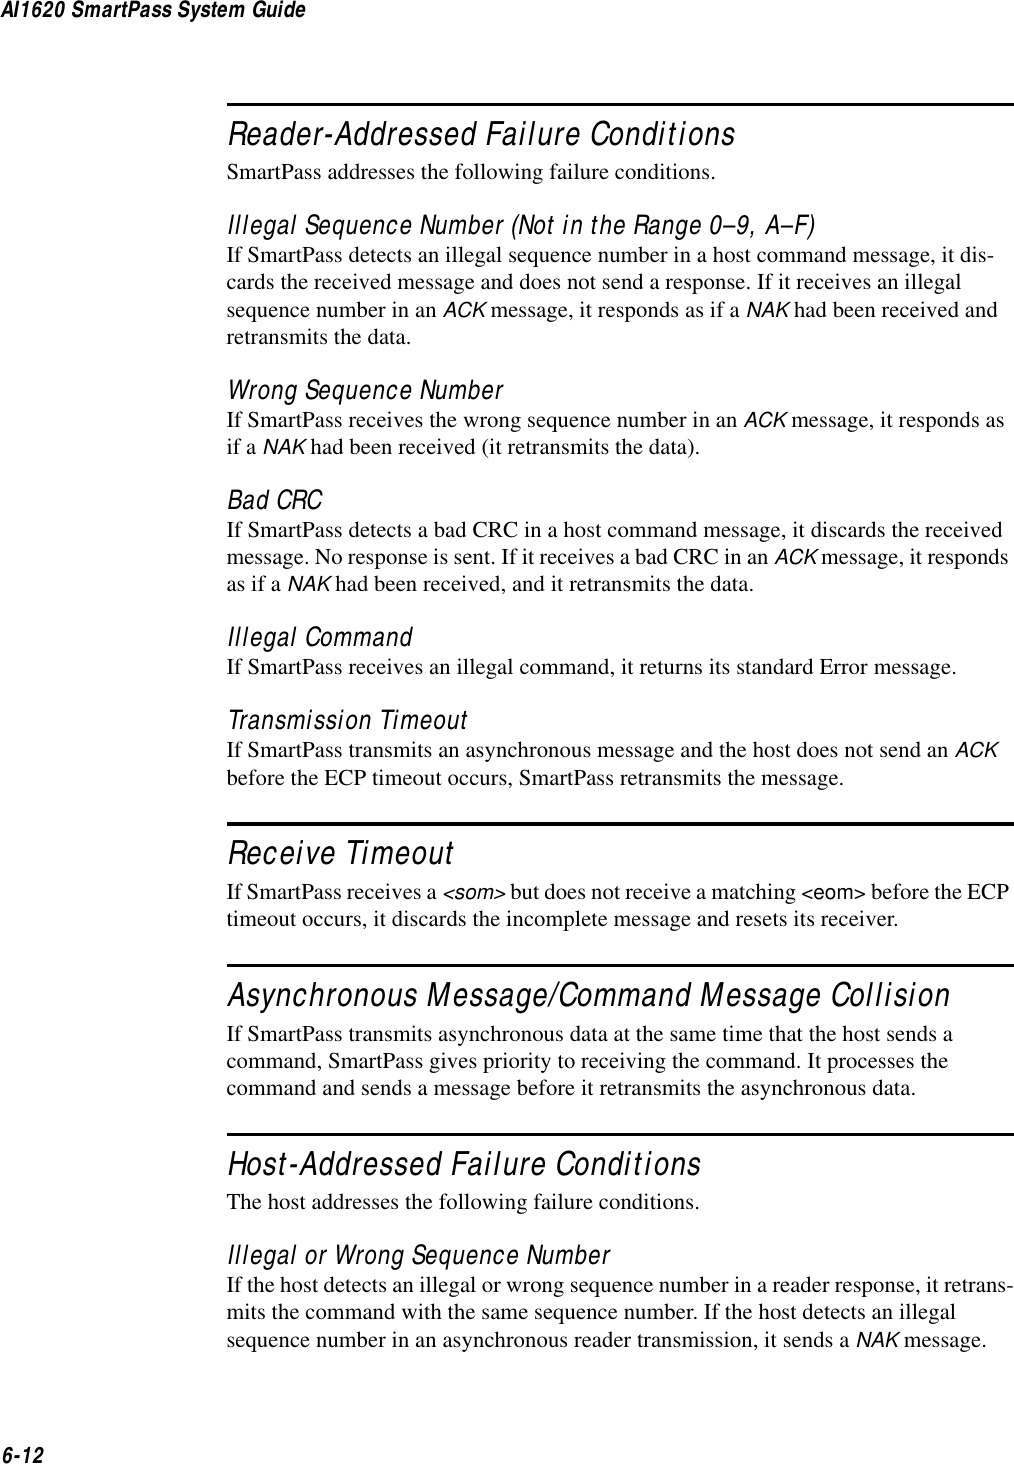 AI1620 SmartPass System Guide6-12Reader-Addressed Failure ConditionsSmartPass addresses the following failure conditions.Illegal Sequence Number (Not in the Range 0–9, A–F)If SmartPass detects an illegal sequence number in a host command message, it dis-cards the received message and does not send a response. If it receives an illegal sequence number in an ACK message, it responds as if a NAK had been received and retransmits the data.Wrong Sequence NumberIf SmartPass receives the wrong sequence number in an ACK message, it responds as if a NAK had been received (it retransmits the data).Bad CRCIf SmartPass detects a bad CRC in a host command message, it discards the received message. No response is sent. If it receives a bad CRC in an ACK message, it responds as if a NAK had been received, and it retransmits the data.Illegal CommandIf SmartPass receives an illegal command, it returns its standard Error message.Transmission TimeoutIf SmartPass transmits an asynchronous message and the host does not send an ACK before the ECP timeout occurs, SmartPass retransmits the message.Receive TimeoutIf SmartPass receives a &lt;som&gt; but does not receive a matching &lt;eom&gt; before the ECP timeout occurs, it discards the incomplete message and resets its receiver.Asynchronous Message/Command Message CollisionIf SmartPass transmits asynchronous data at the same time that the host sends a command, SmartPass gives priority to receiving the command. It processes the command and sends a message before it retransmits the asynchronous data.Host-Addressed Failure ConditionsThe host addresses the following failure conditions.Illegal or Wrong Sequence NumberIf the host detects an illegal or wrong sequence number in a reader response, it retrans-mits the command with the same sequence number. If the host detects an illegal sequence number in an asynchronous reader transmission, it sends a NAK message.